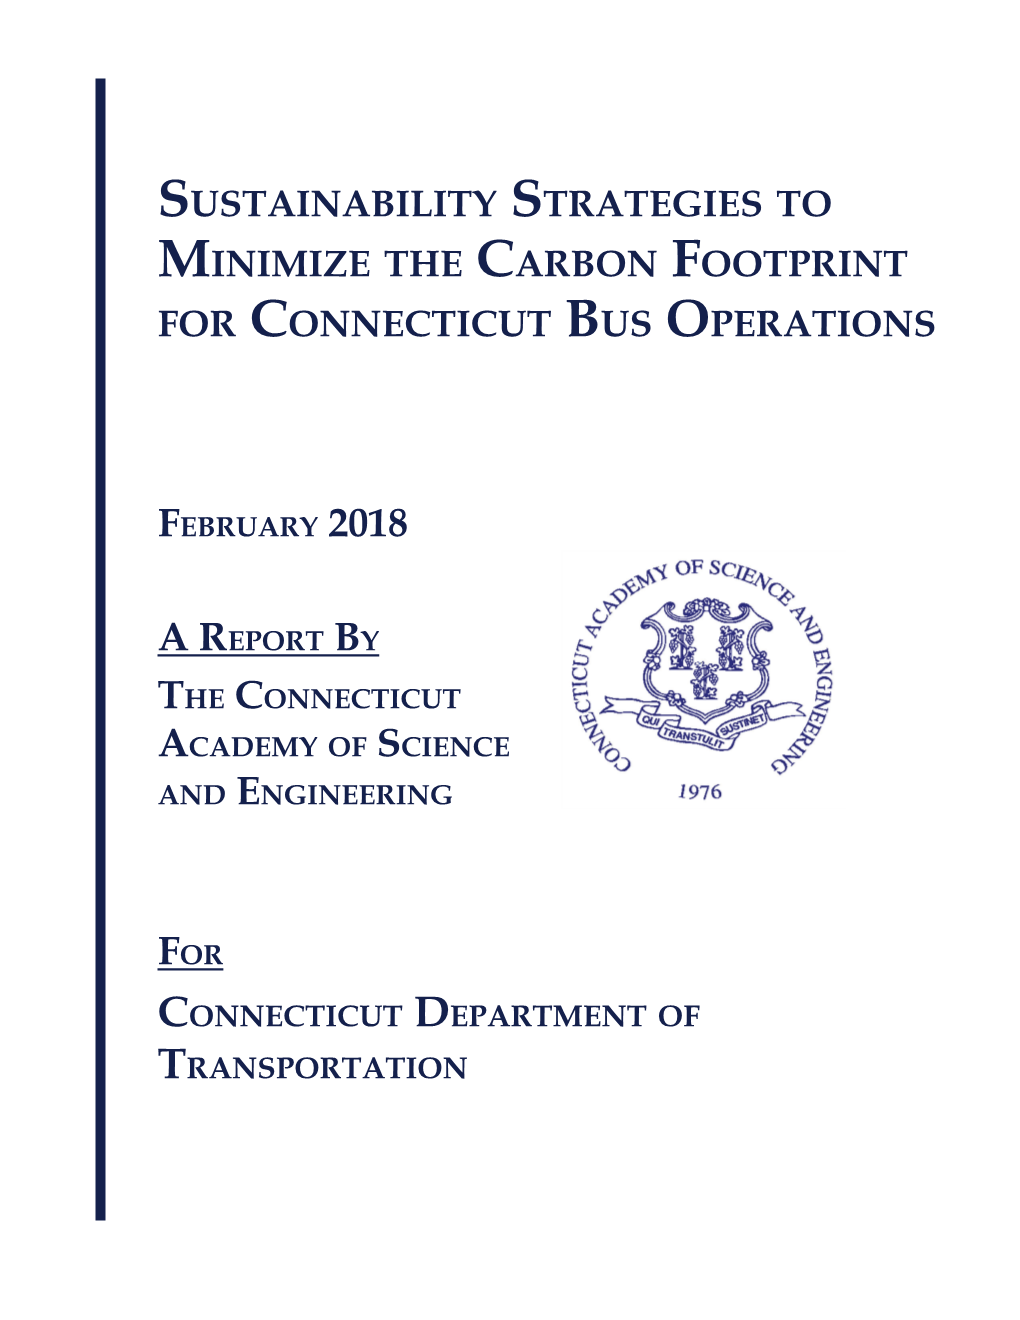 Sustainability Strategies to Minimize the Carbon Footprint for Connecticut Bus Operations